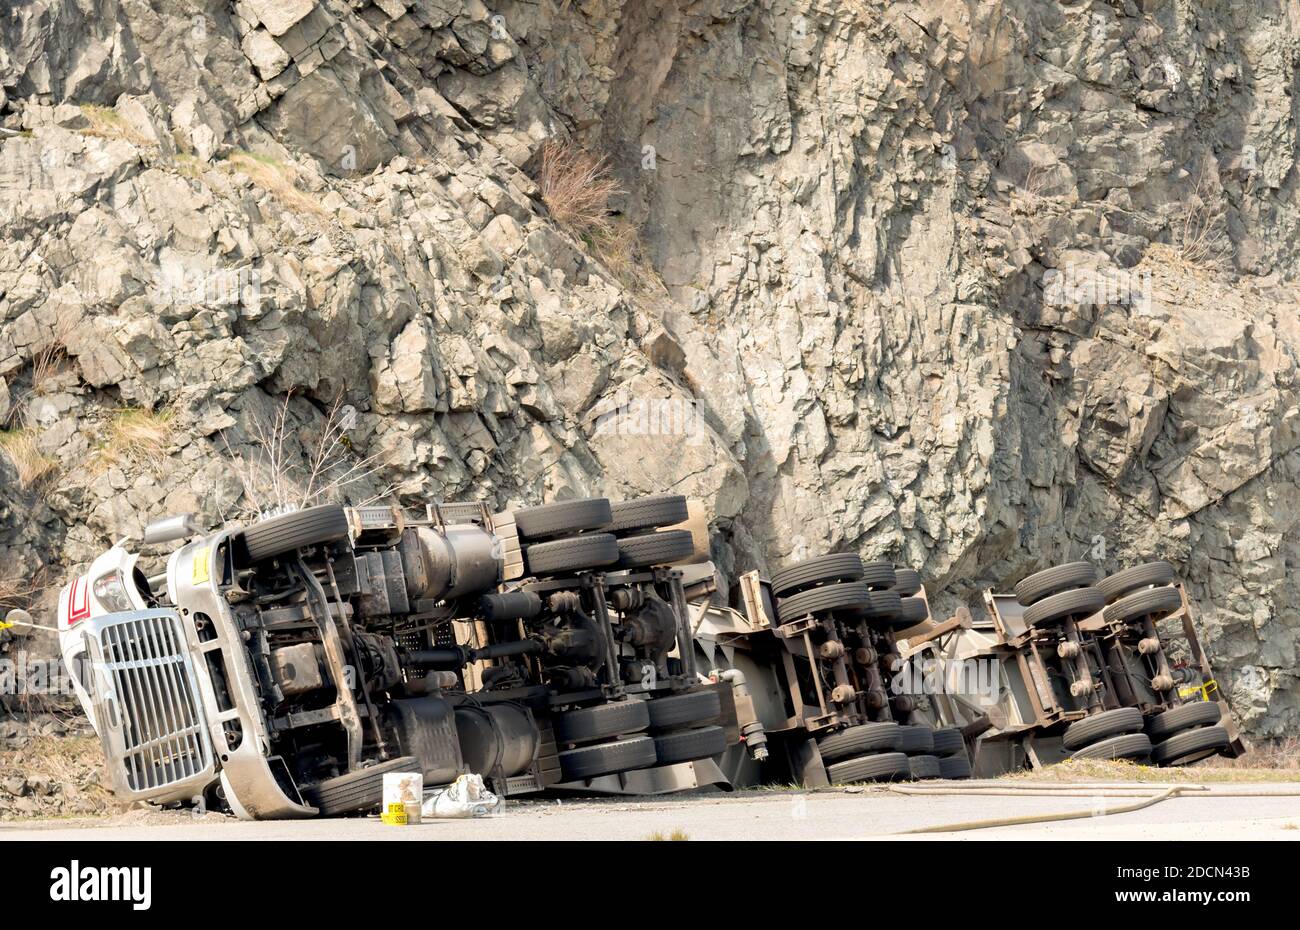 A large tanker truck flipped on its side in a ditch. The truck has 30 wheels, and the front appears damaged. A high cliff is in the background. Stock Photo